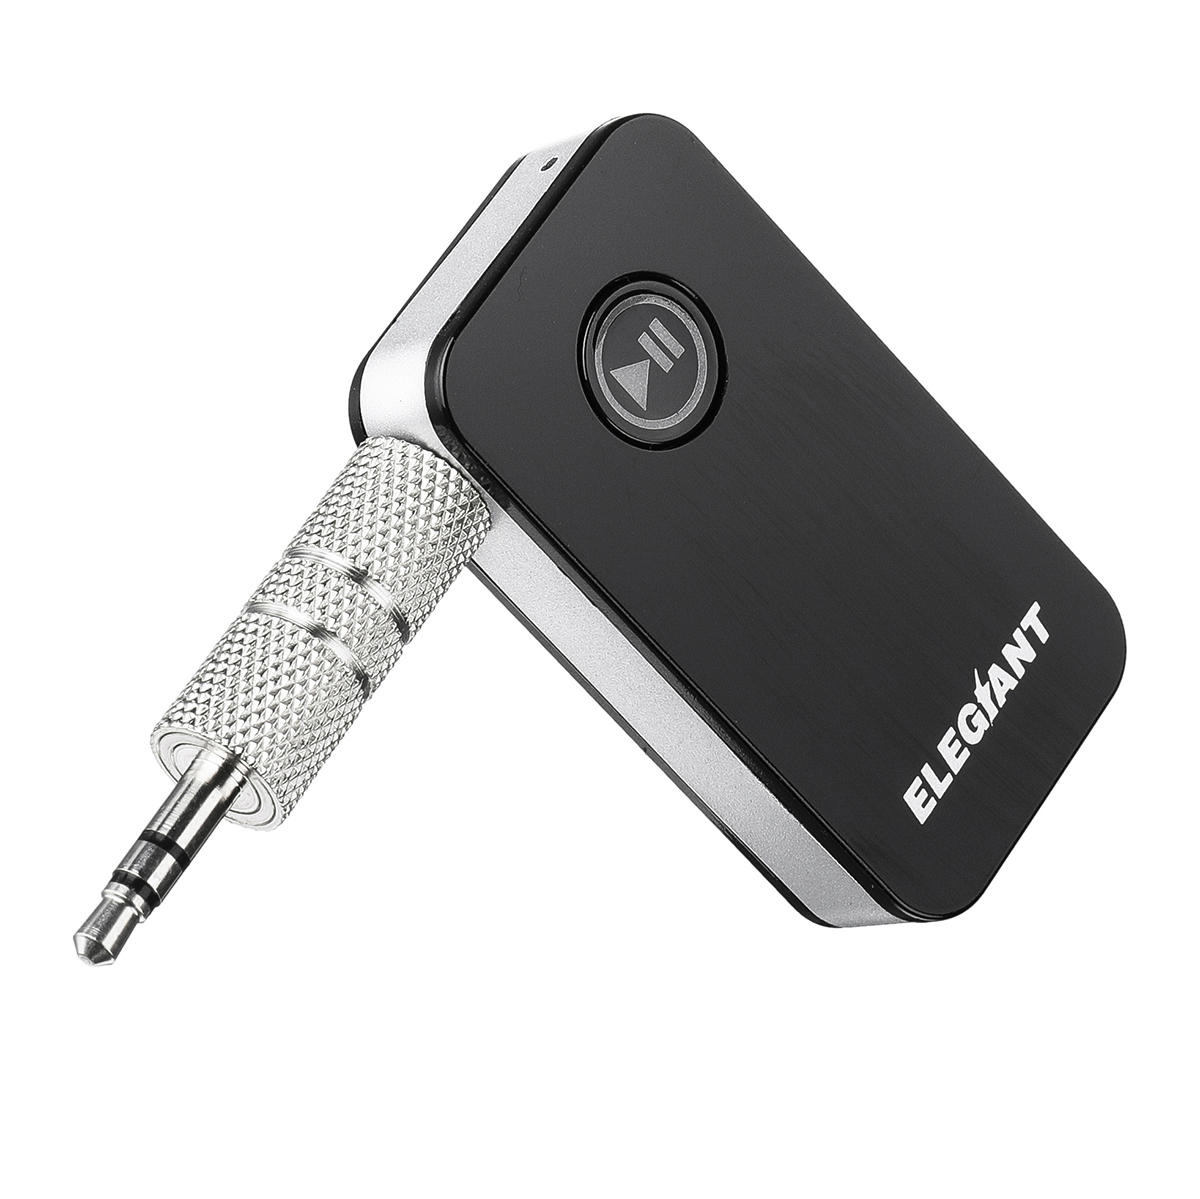 

ELEGIANT bluetooth 5.0 Mini Wireless Audio Receiver Adapter Hands-free Calling 3.5mm AUX Stereo Car Kit for Speaker Head